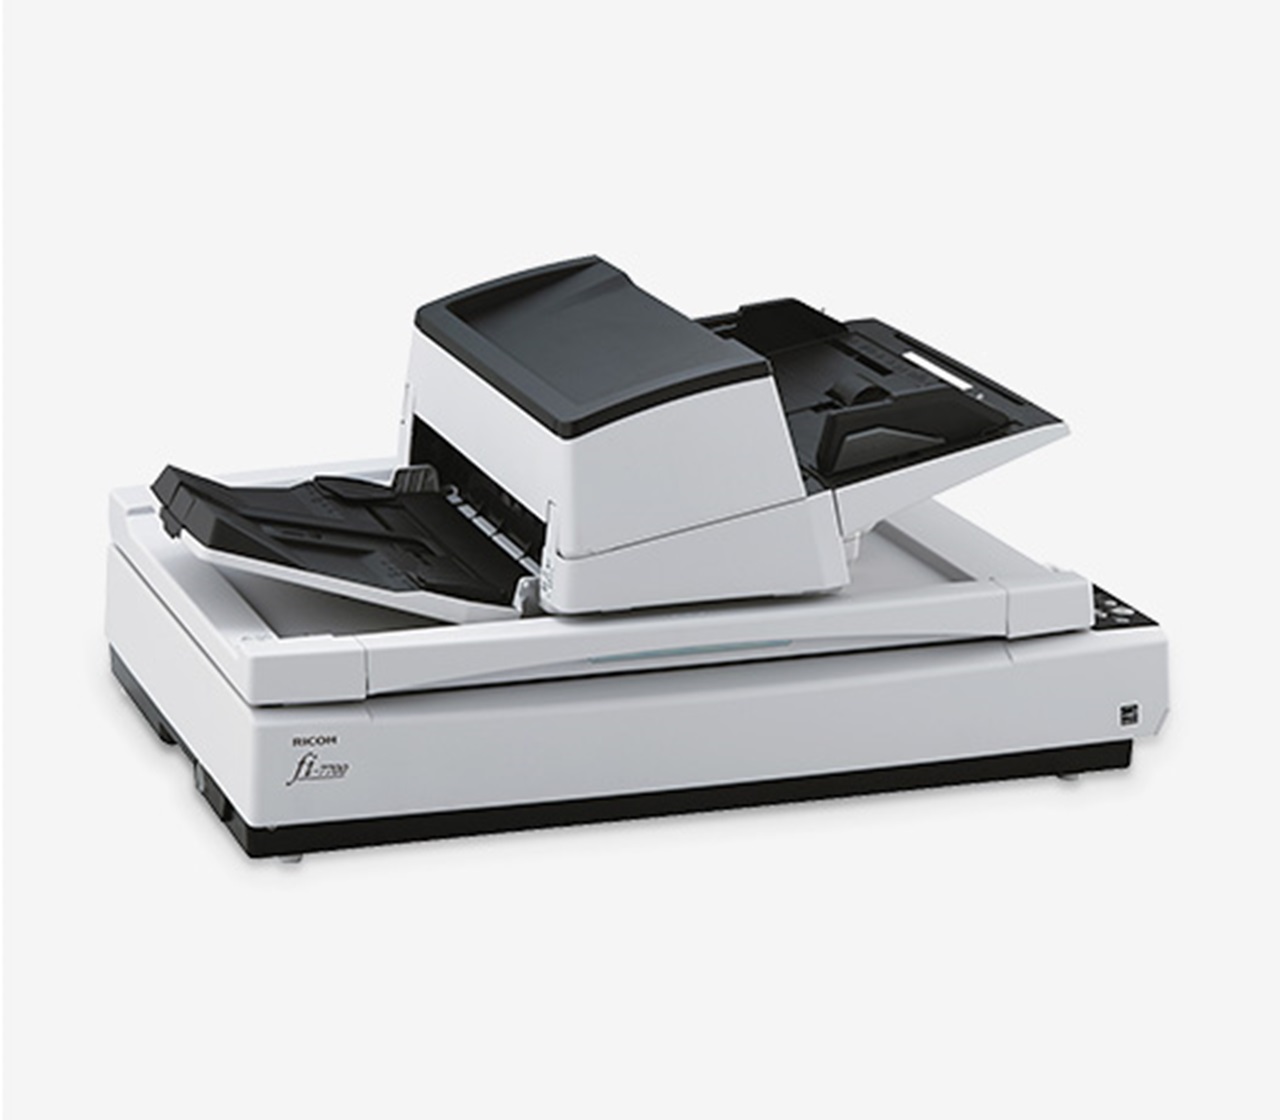 Ricoh fi-7700 - High Speed ADF & Flatbed Scanner - Formerly